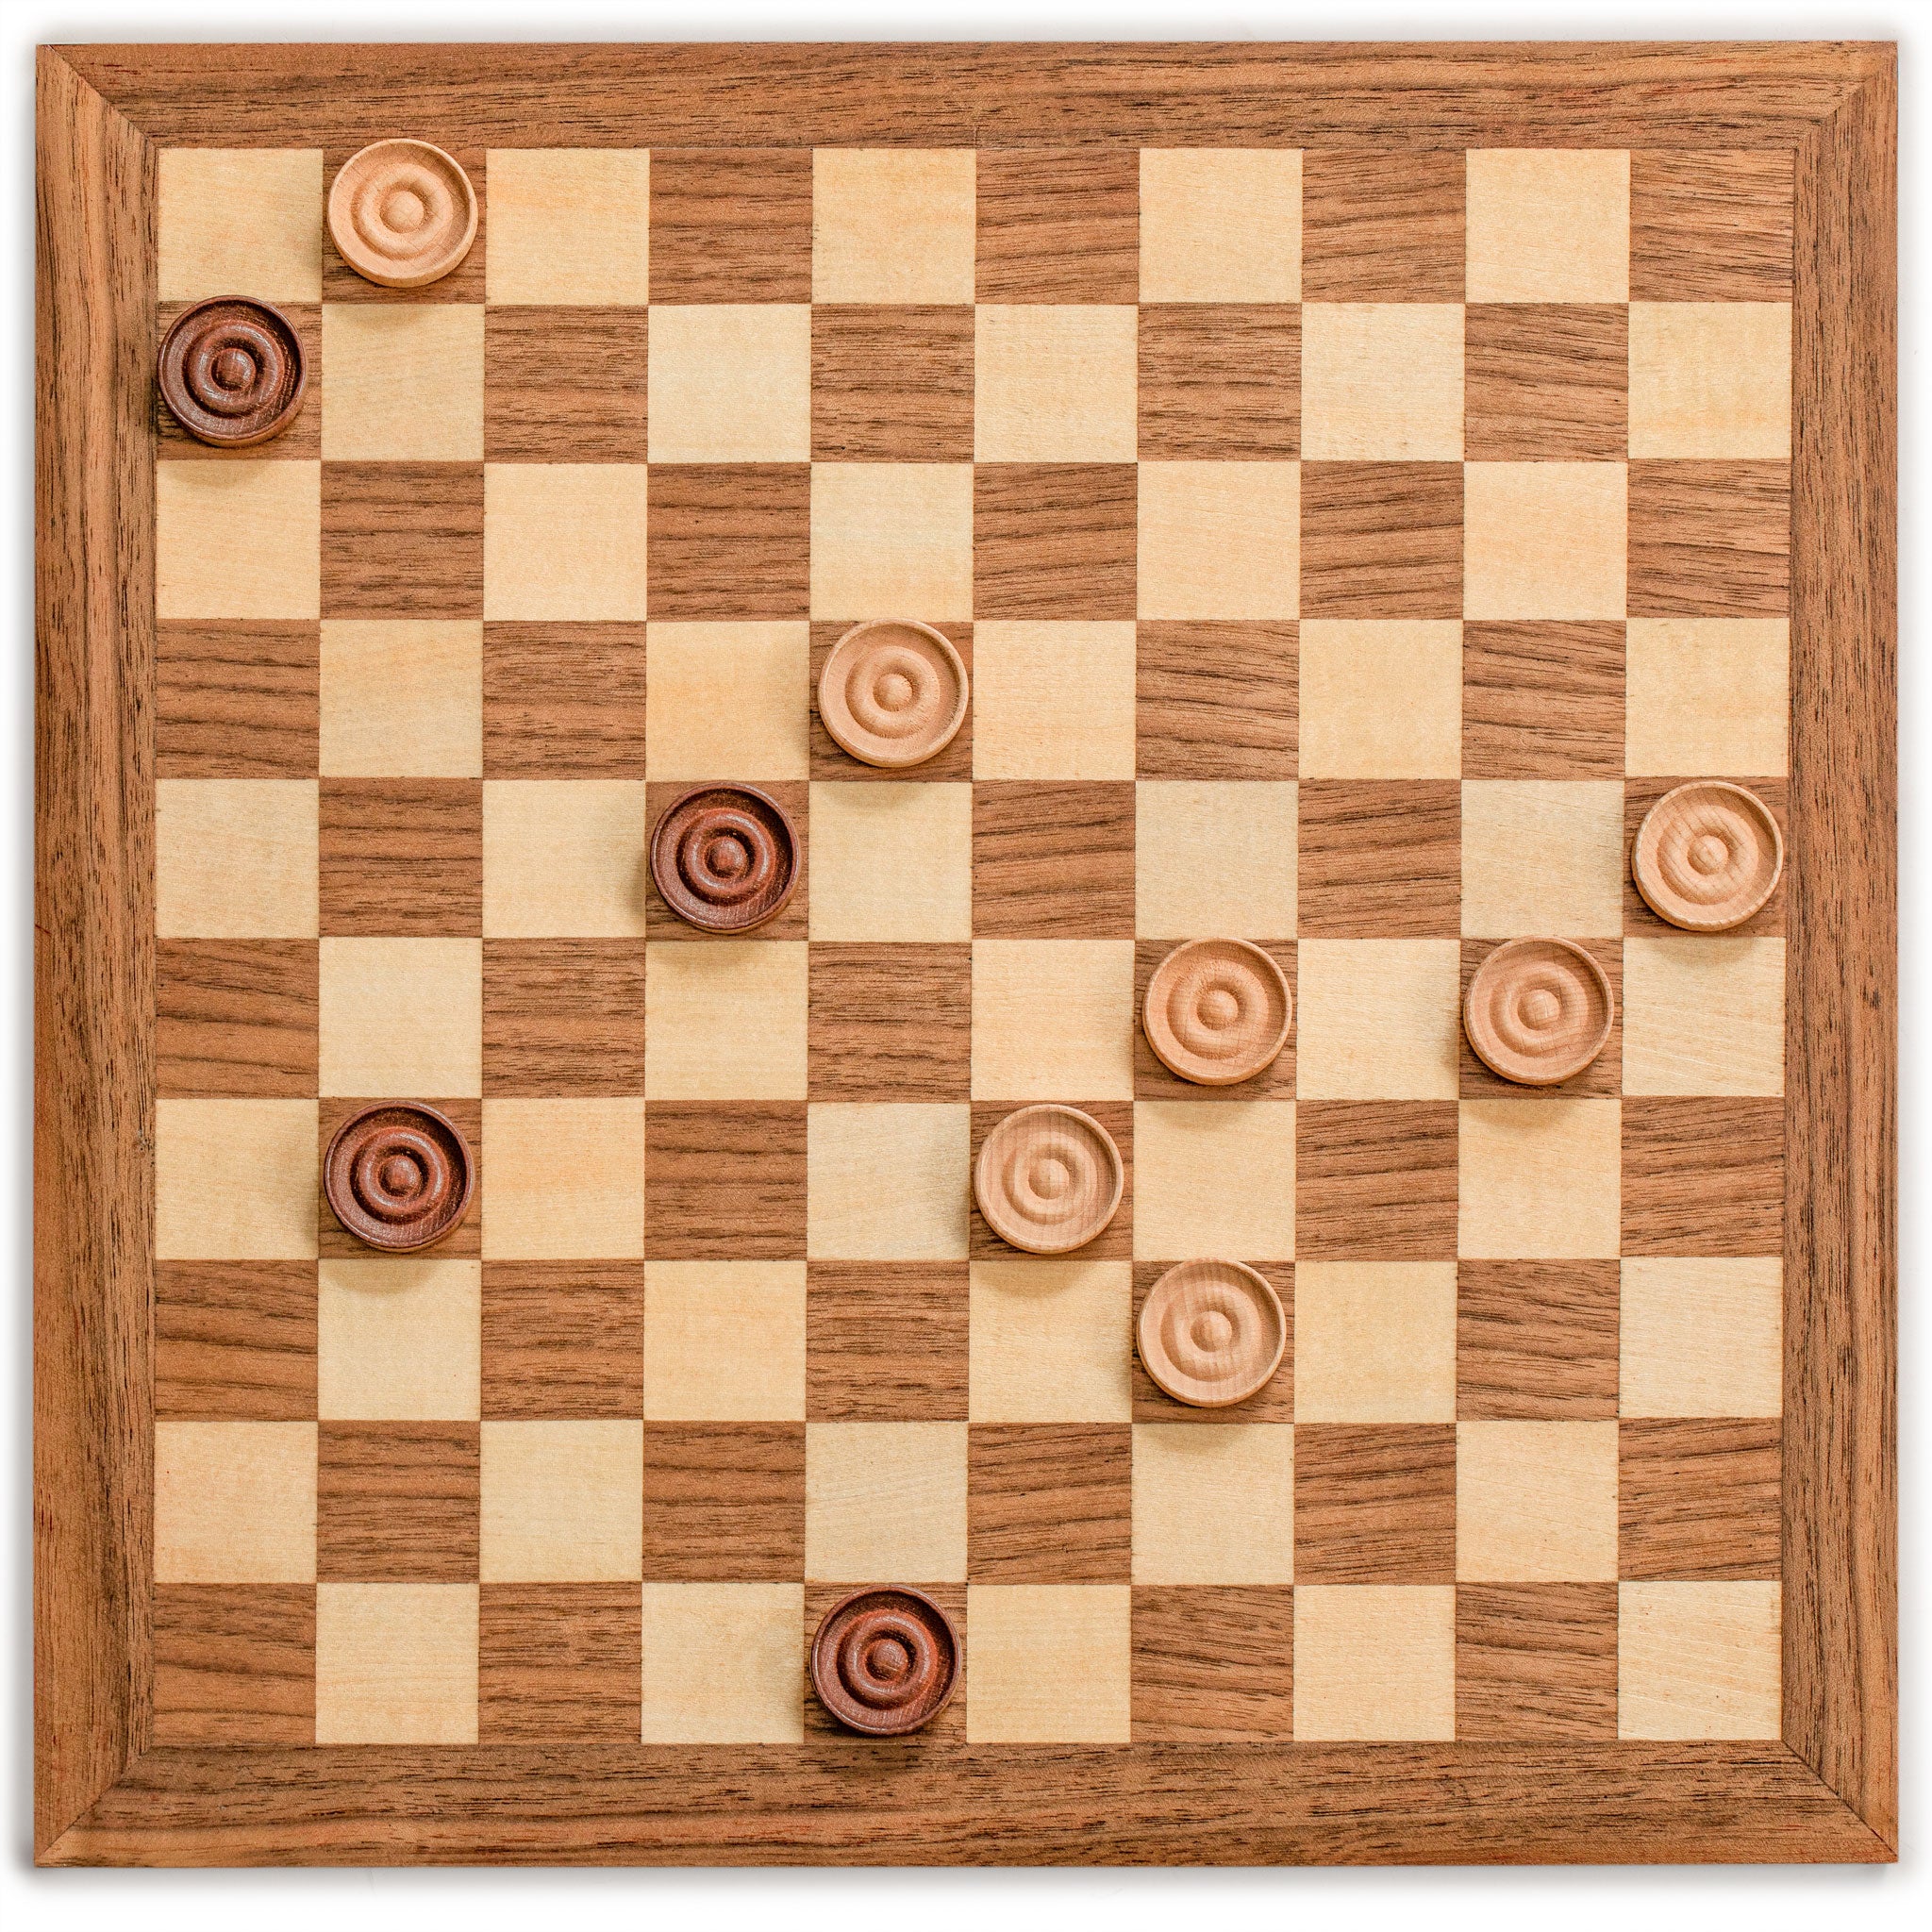 Husaria Reversible Checkers and Draughts Wooden Game Set - 10x10 and 8x8 Board-Husaria